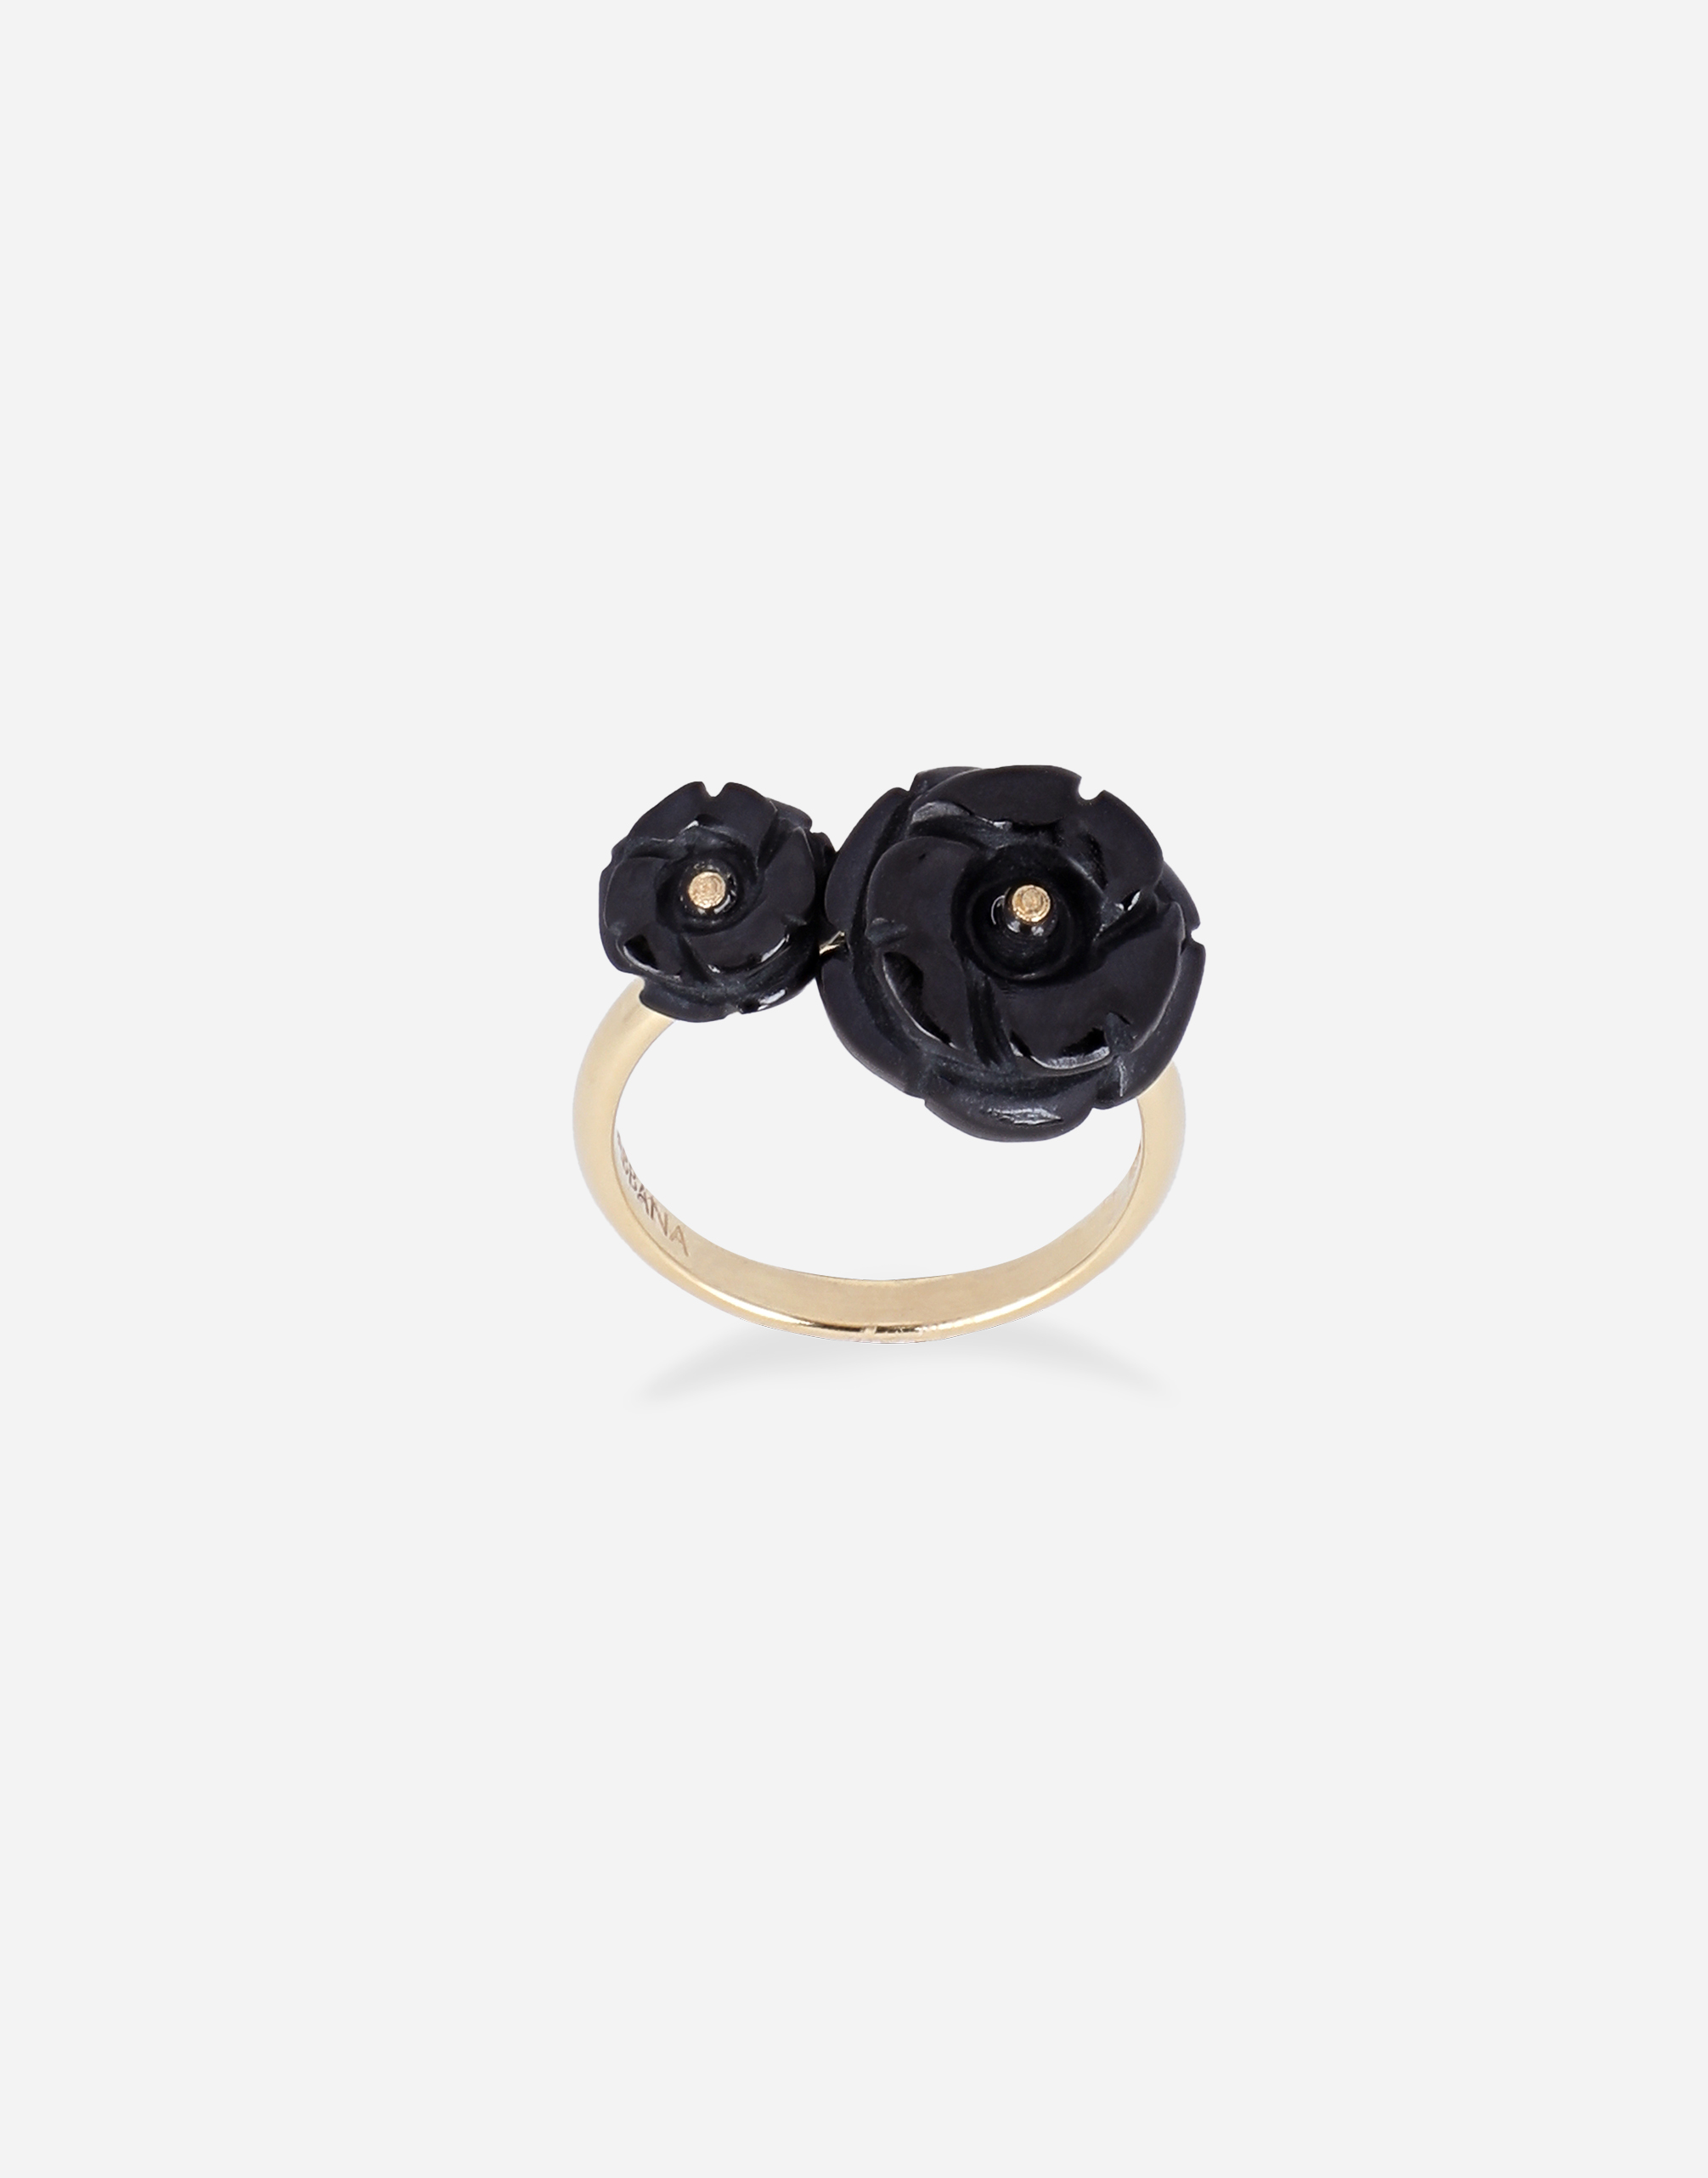 Rose ring in yellow 18kt gold with black jade roses in Gold